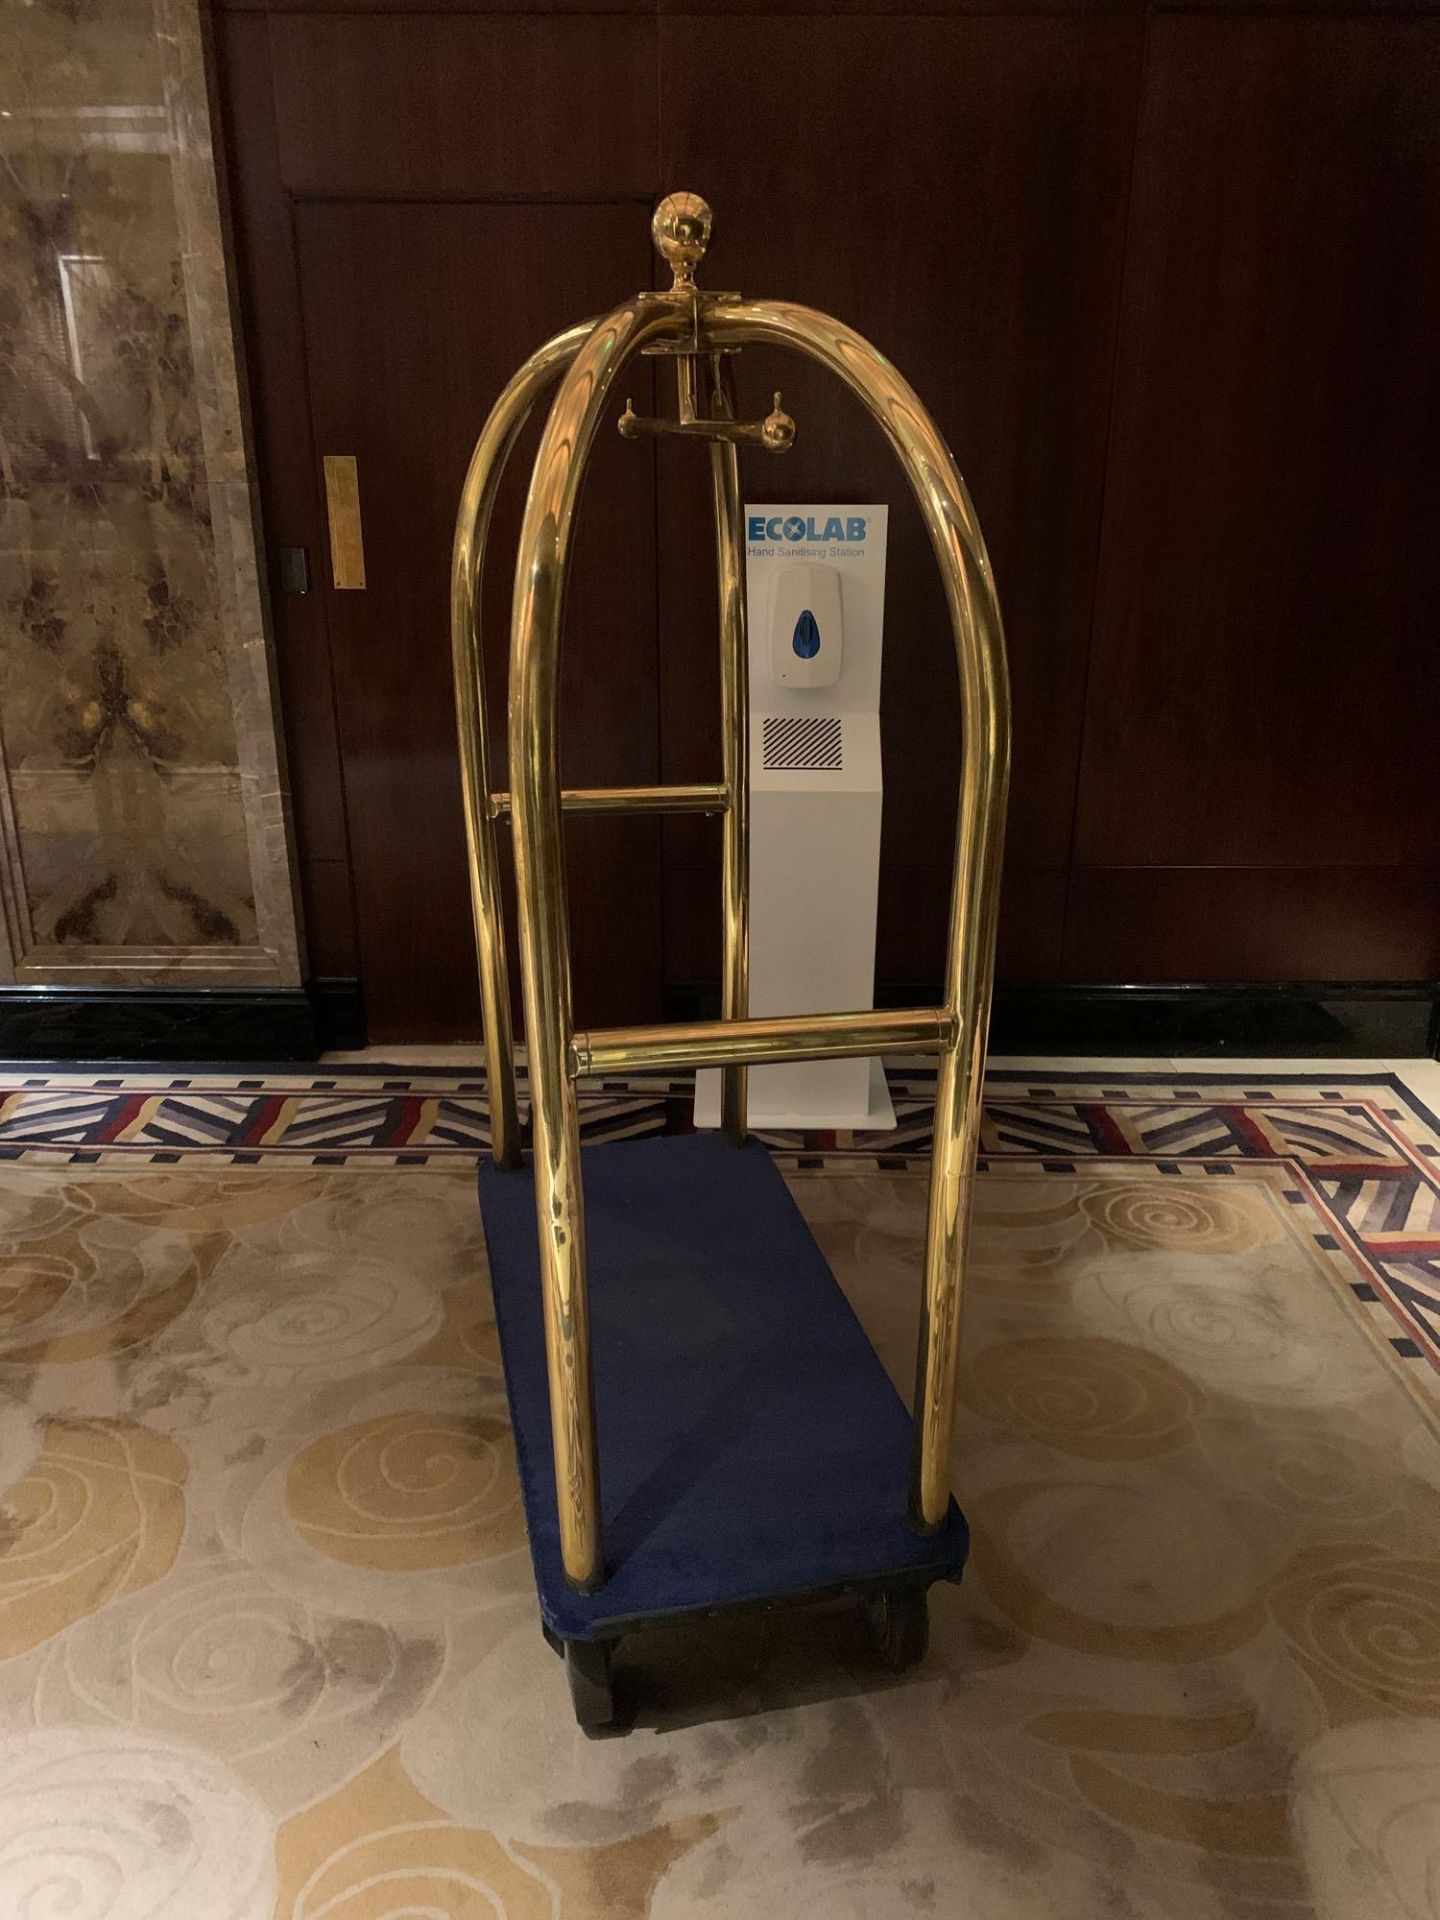 Brass Birdcage Trolley Concierge Cart With A Blue Velvet Pad 115x 55x 180cm ( Loc Lobby) - Image 4 of 4